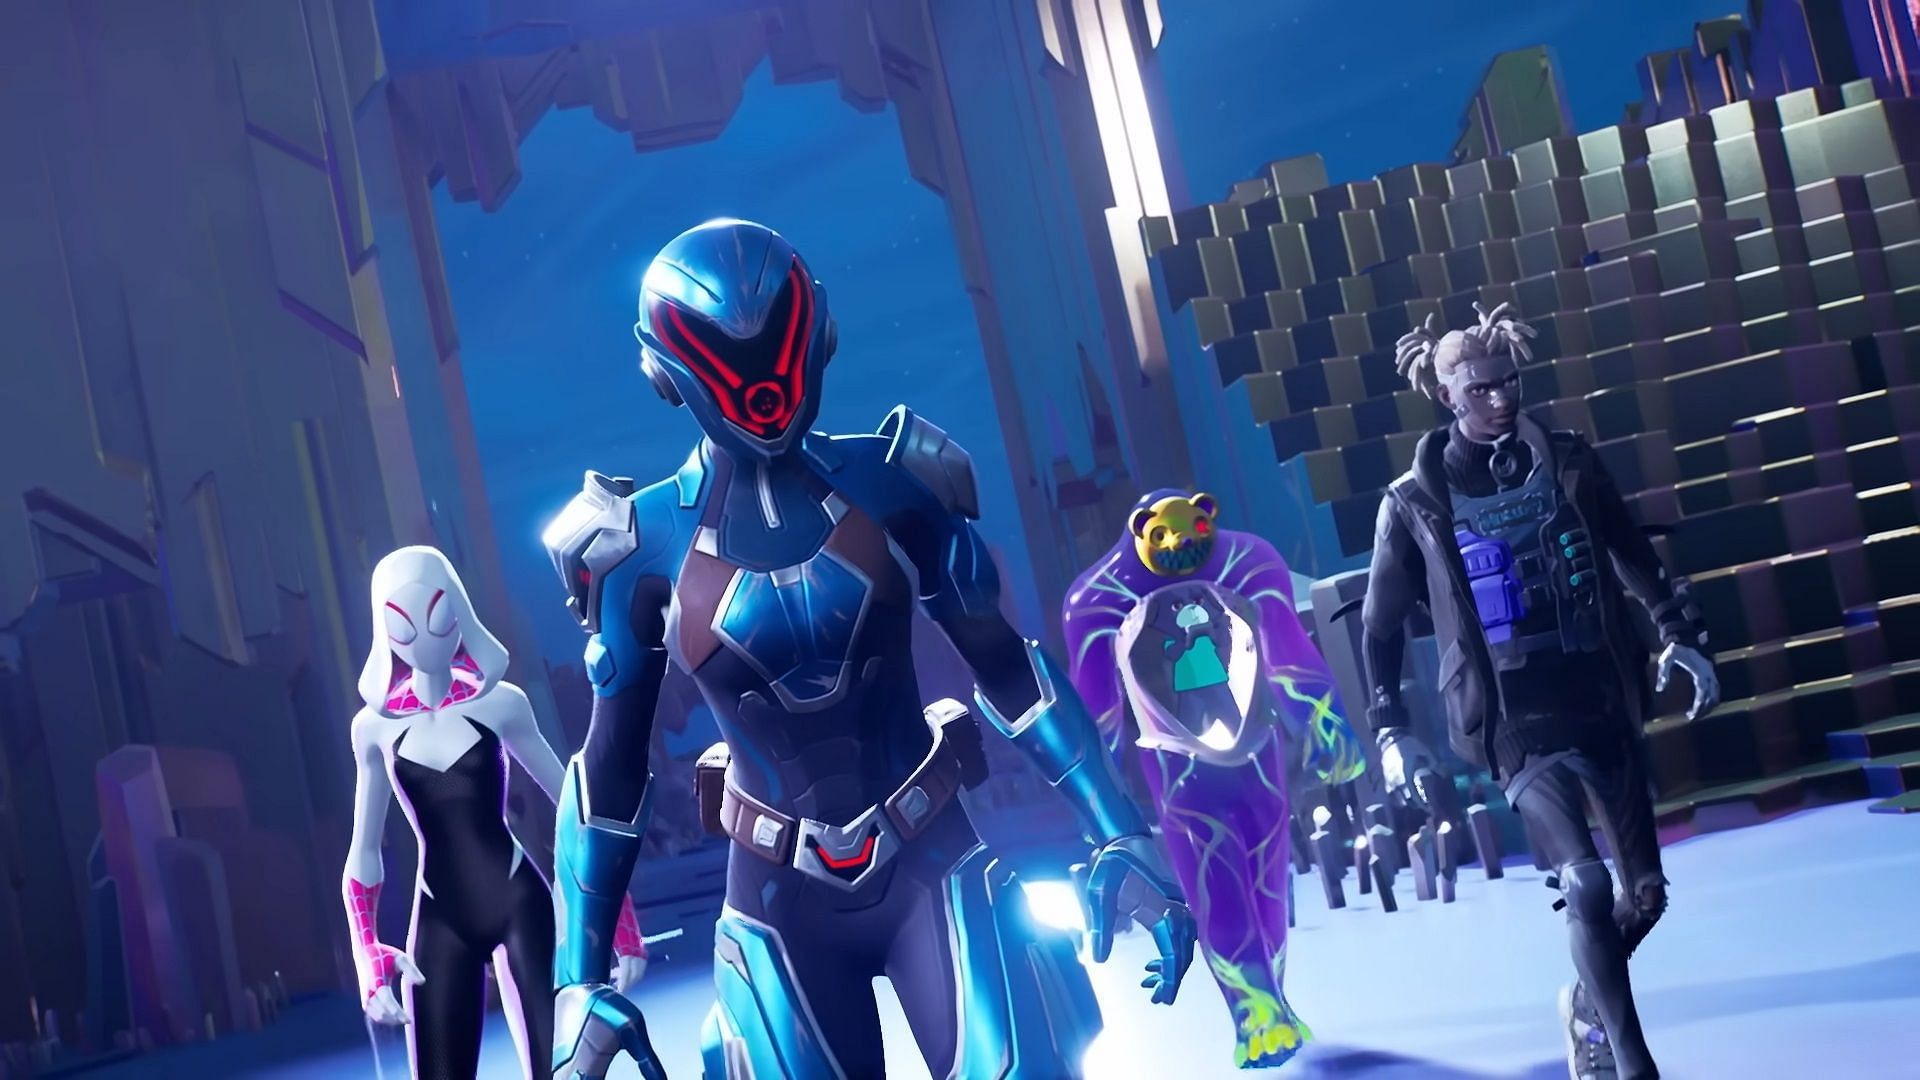 Fortnite Players Upset With New Restrictions On Skins, Epic Responds - Game  Informer